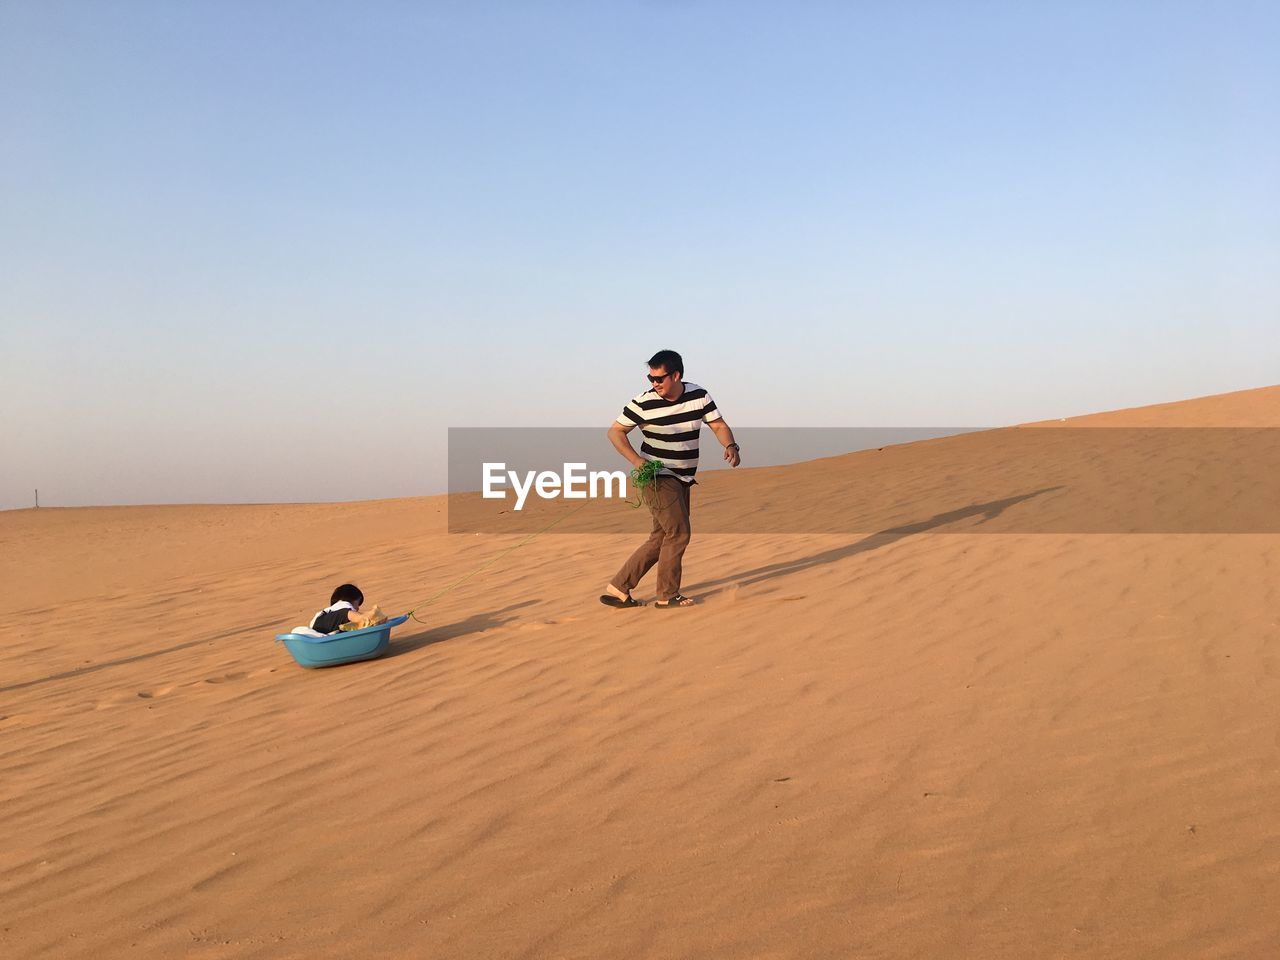 Father pulling son in small bathtub at desert against sky